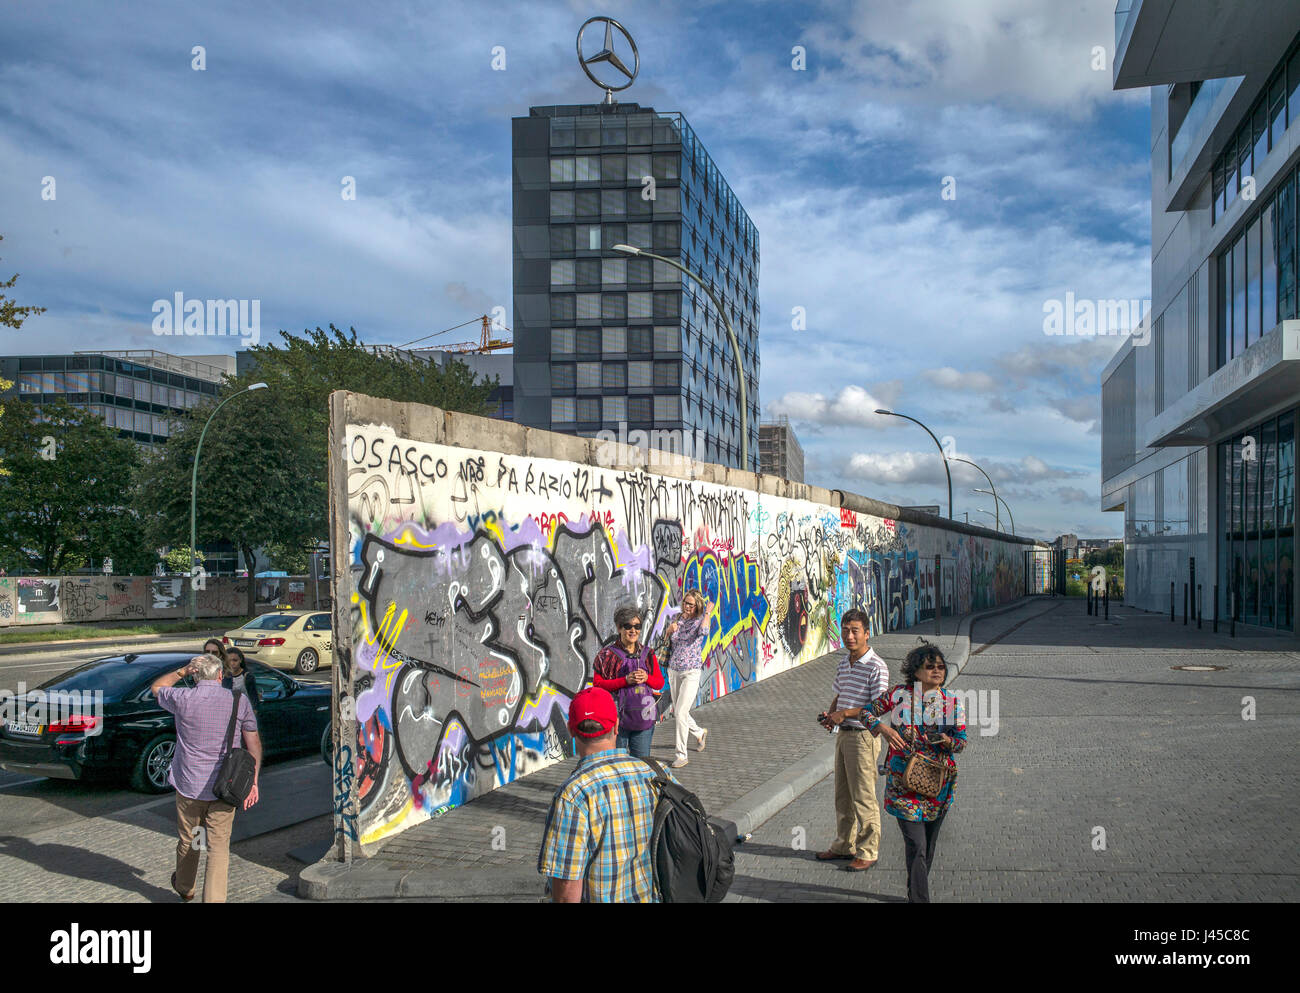 Tourists take pictures of a section of the East Side Gallery on Mühlenstrasse, Berlin, site of the few last remaining parts of the Berlin Wall adorned Stock Photo